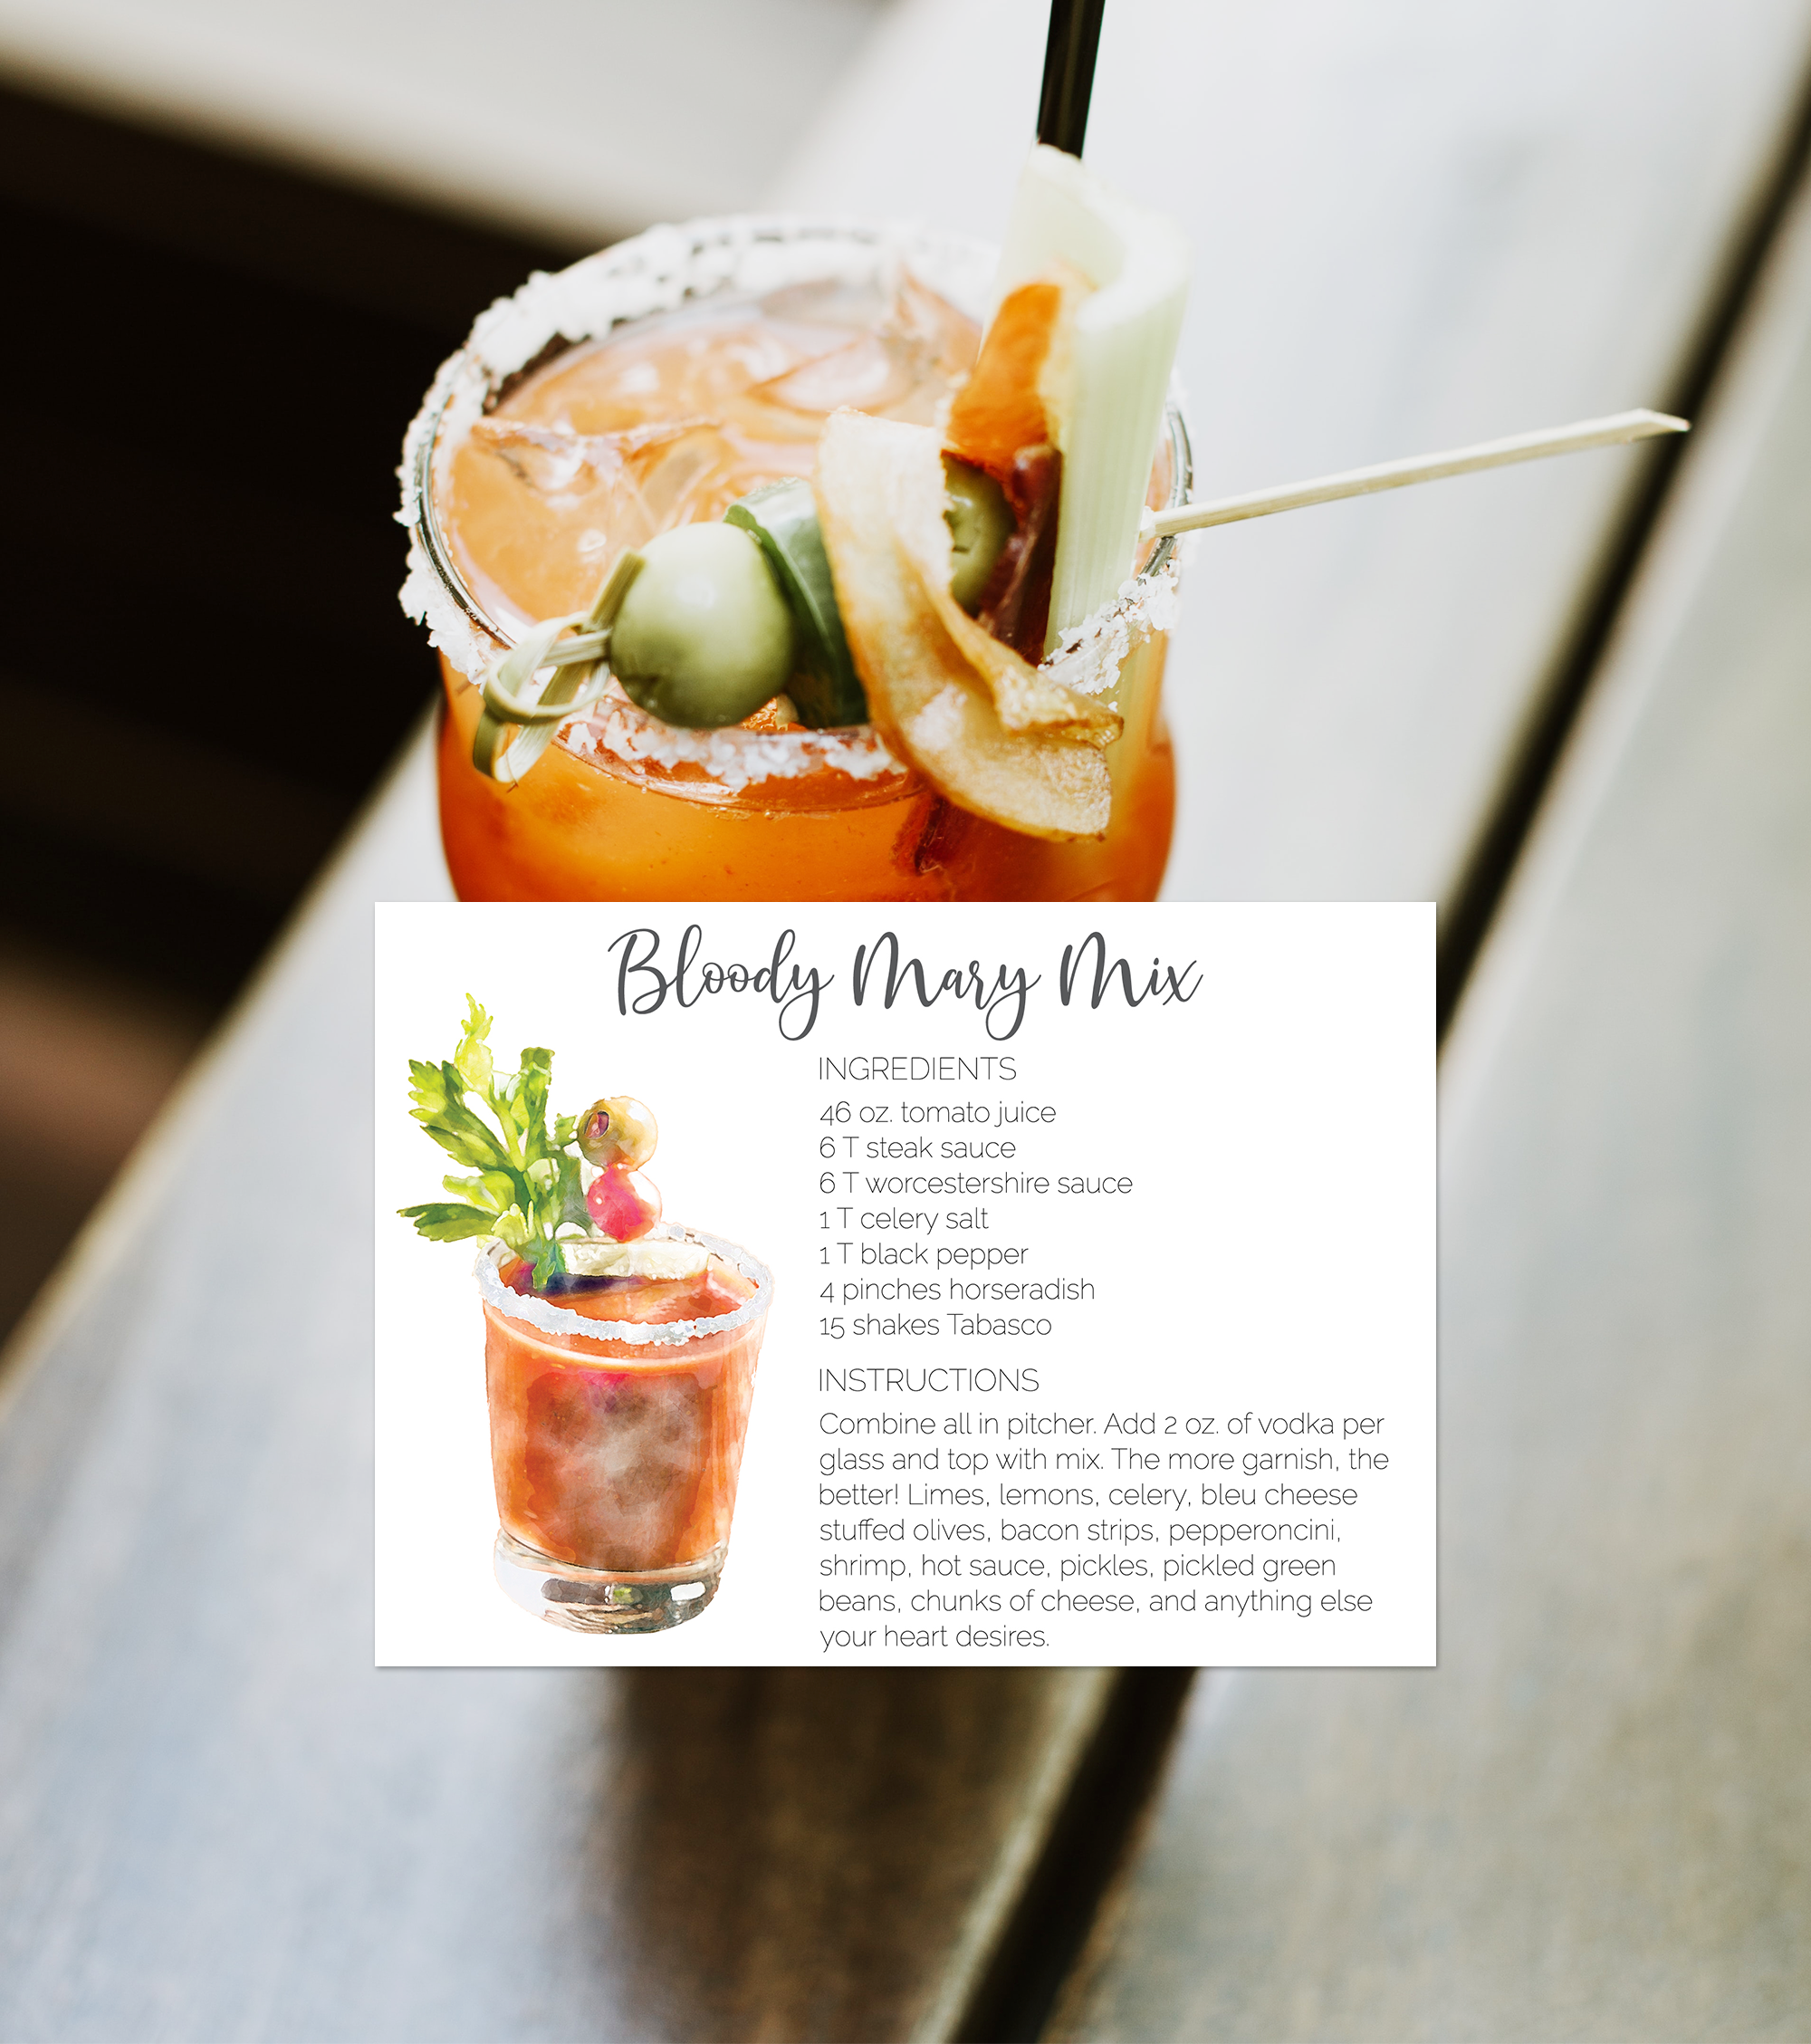 https://lafayettepapers.com/wp-content/uploads/2021/09/bloodymary.png